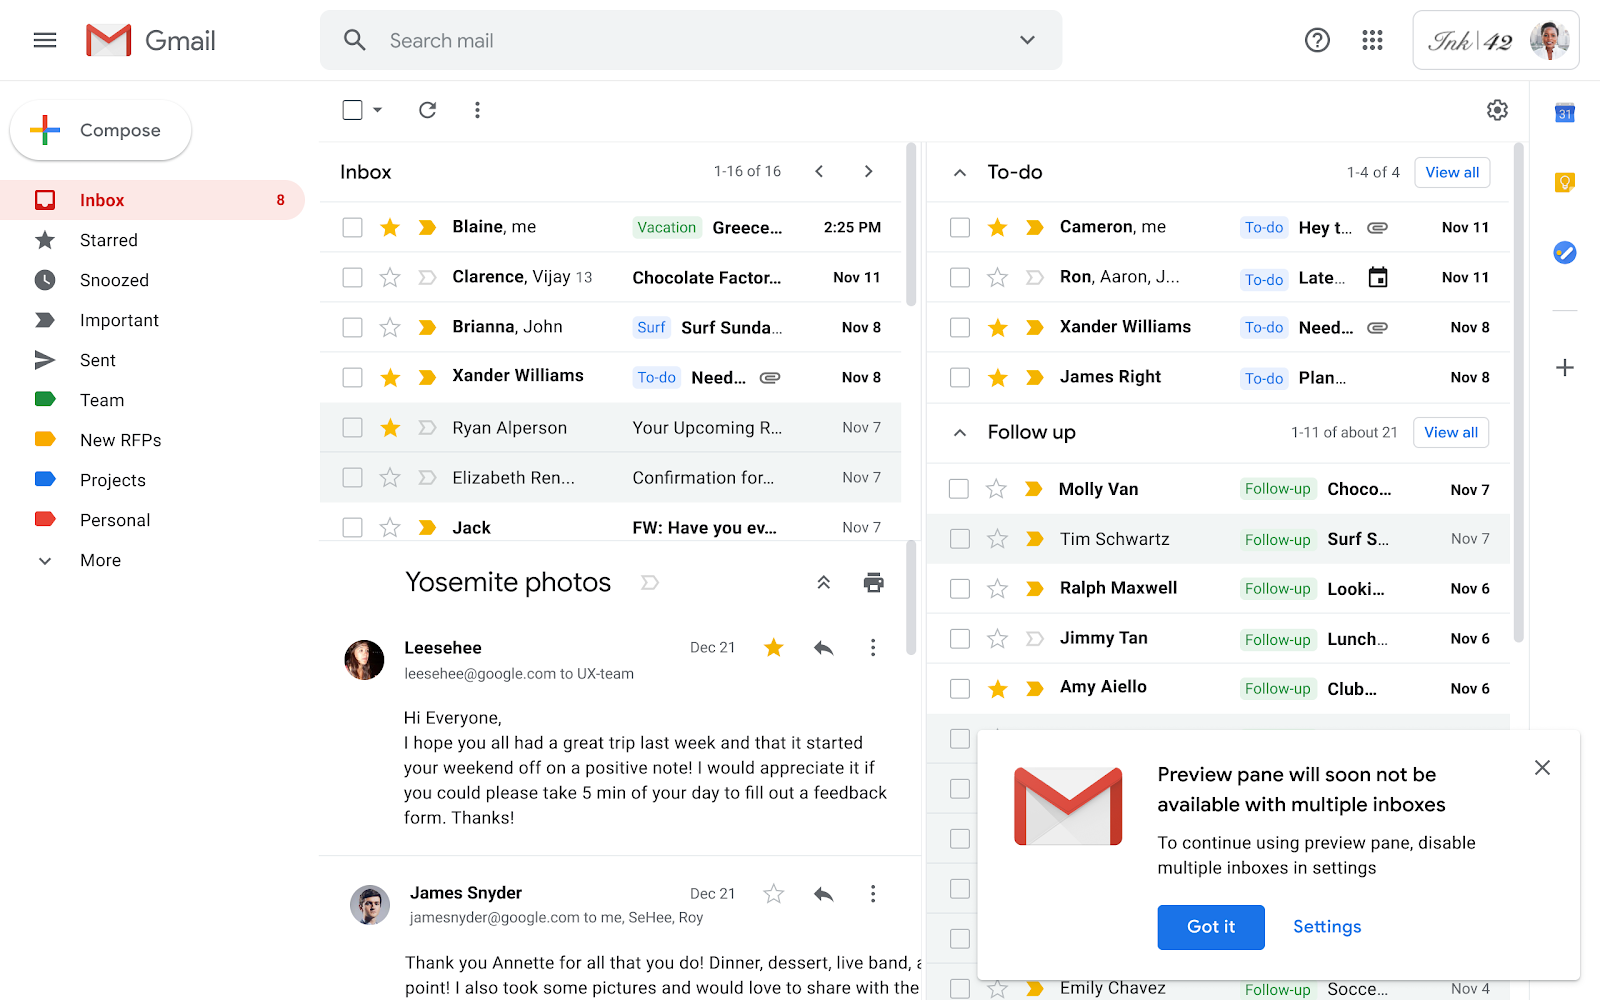 Google Workspace Updates: Changes to multiple inboxes in Gmail starting  February 20, 2020